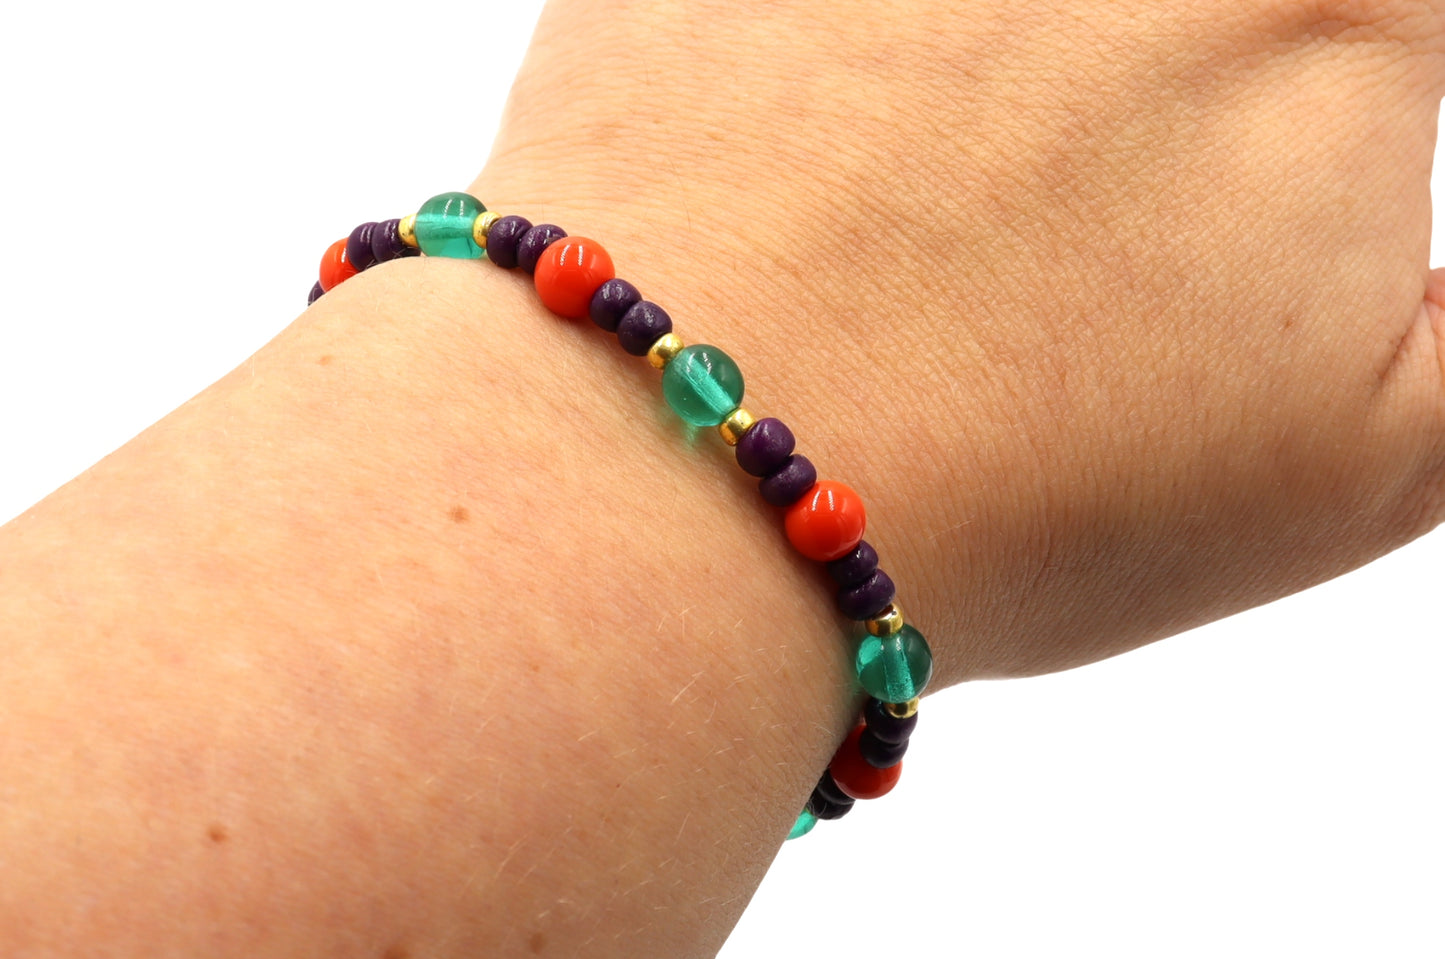 This Bracelet Will Put a Spell on You So Buy It Now Purple, Green and Orange Glass Bracelet by Monkey's Mojo